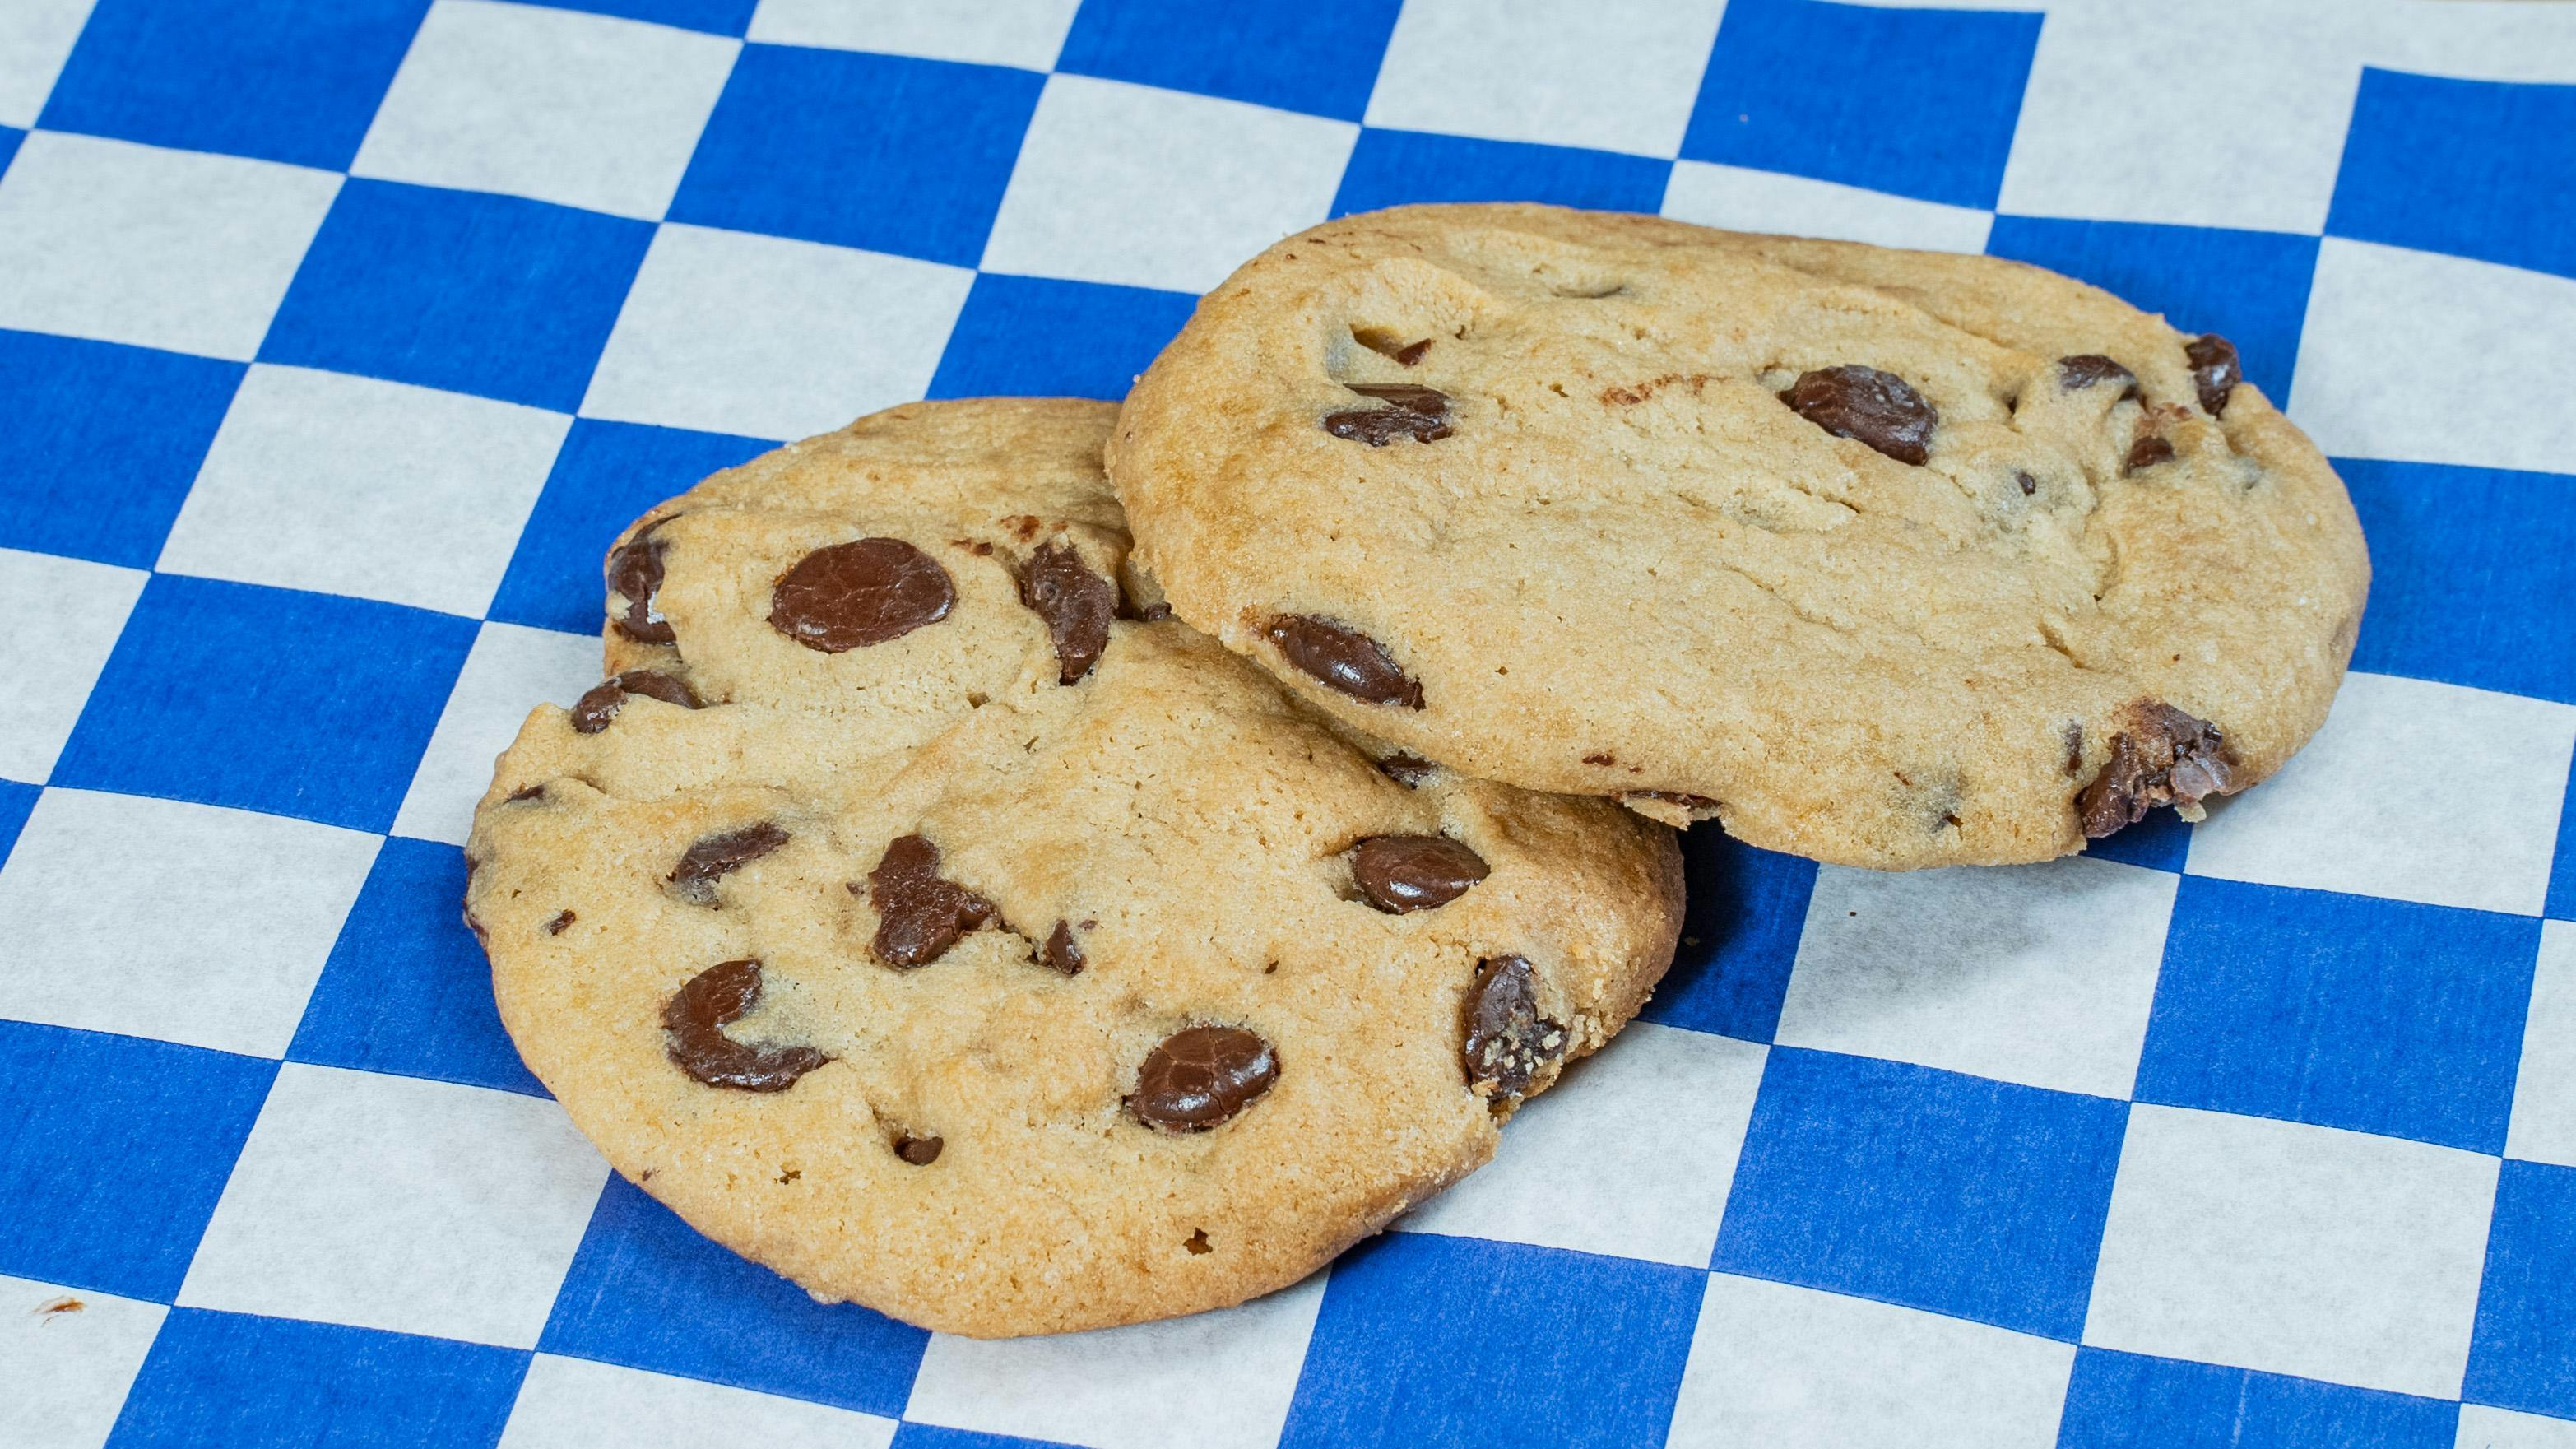 Chocolate Chip Cookies from Austin Hotdog Company - Research Blvd in Austin, TX